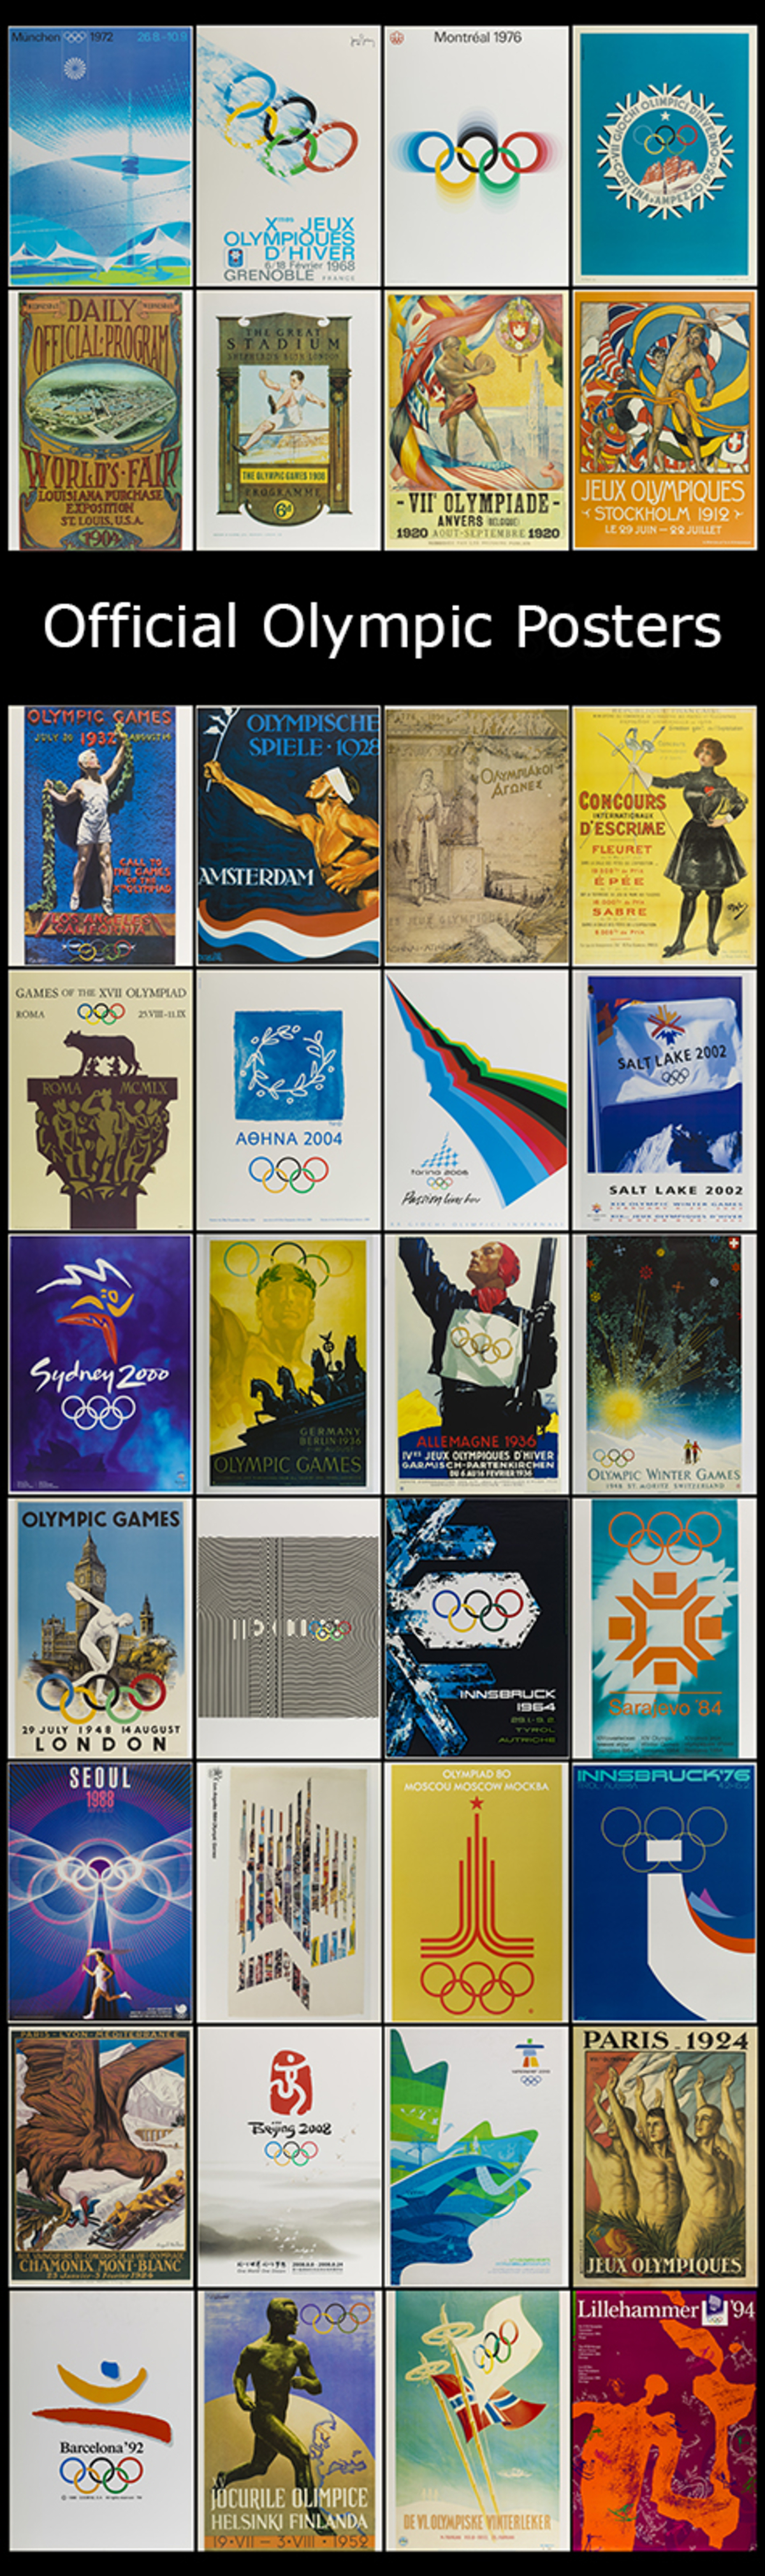 Official Olympic posters.